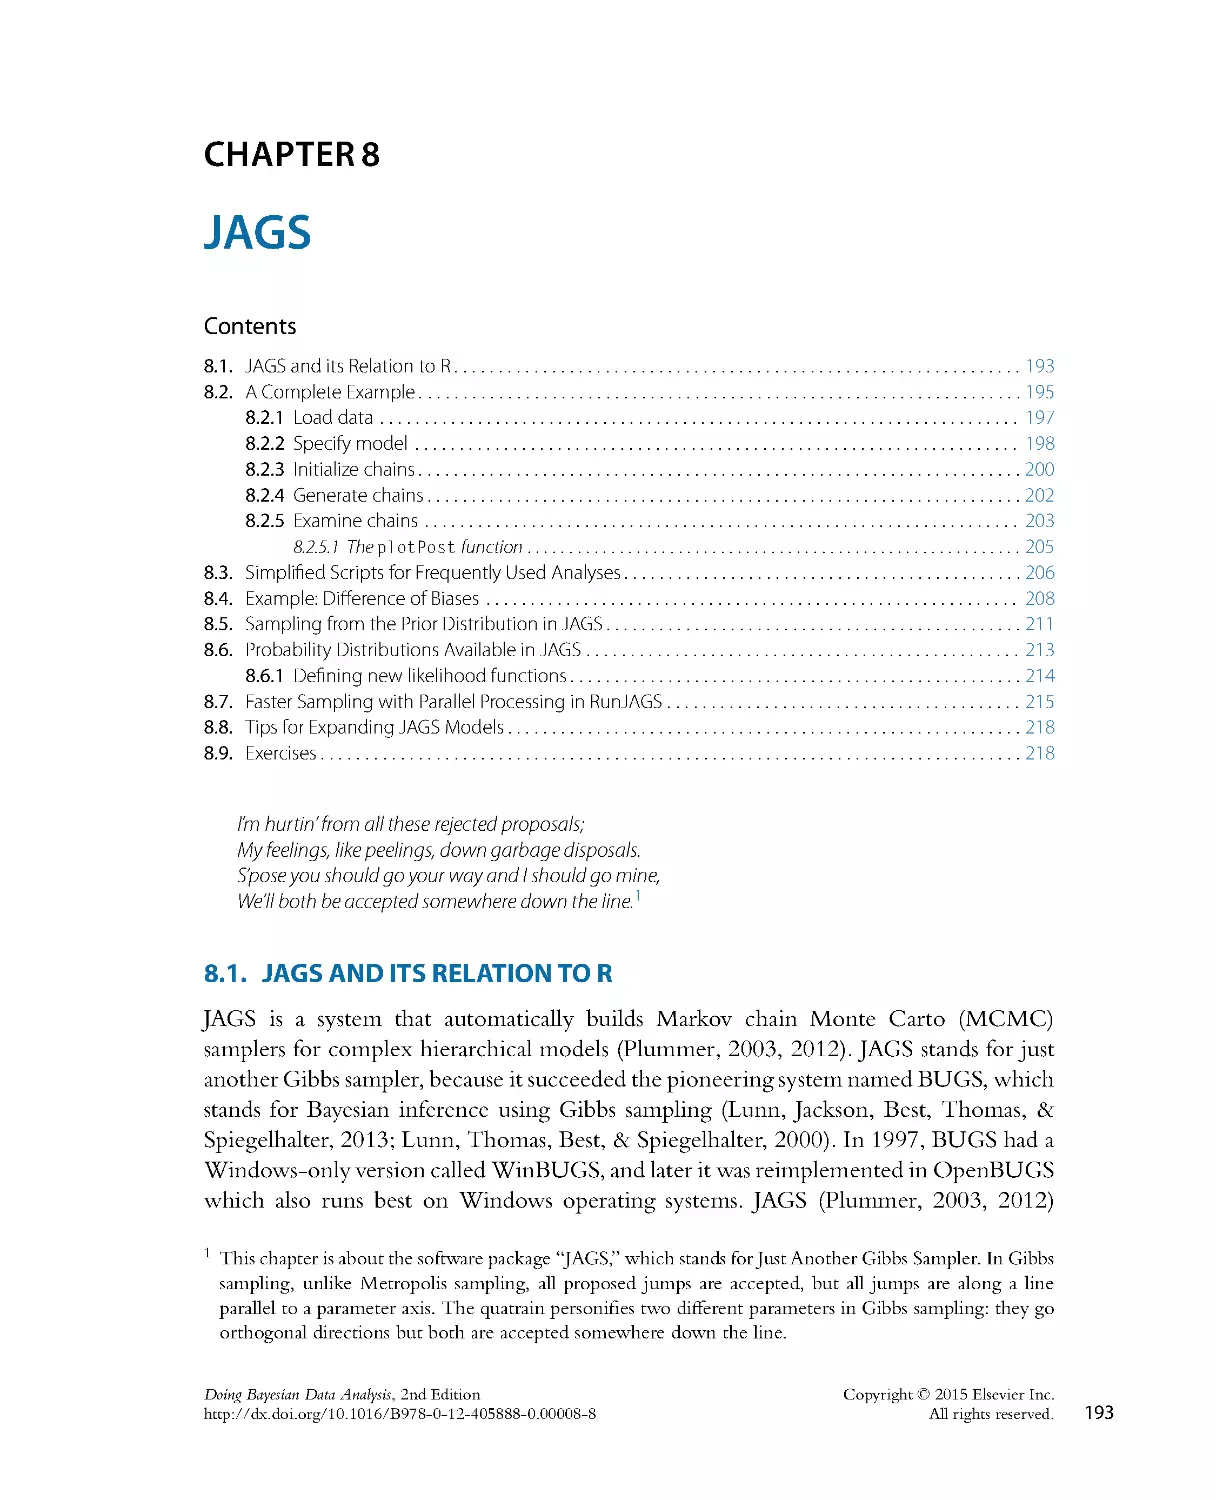 13. Chapter-8-JAGS_2015_Doing-Bayesian-Data-Analysis-Second-Edition-